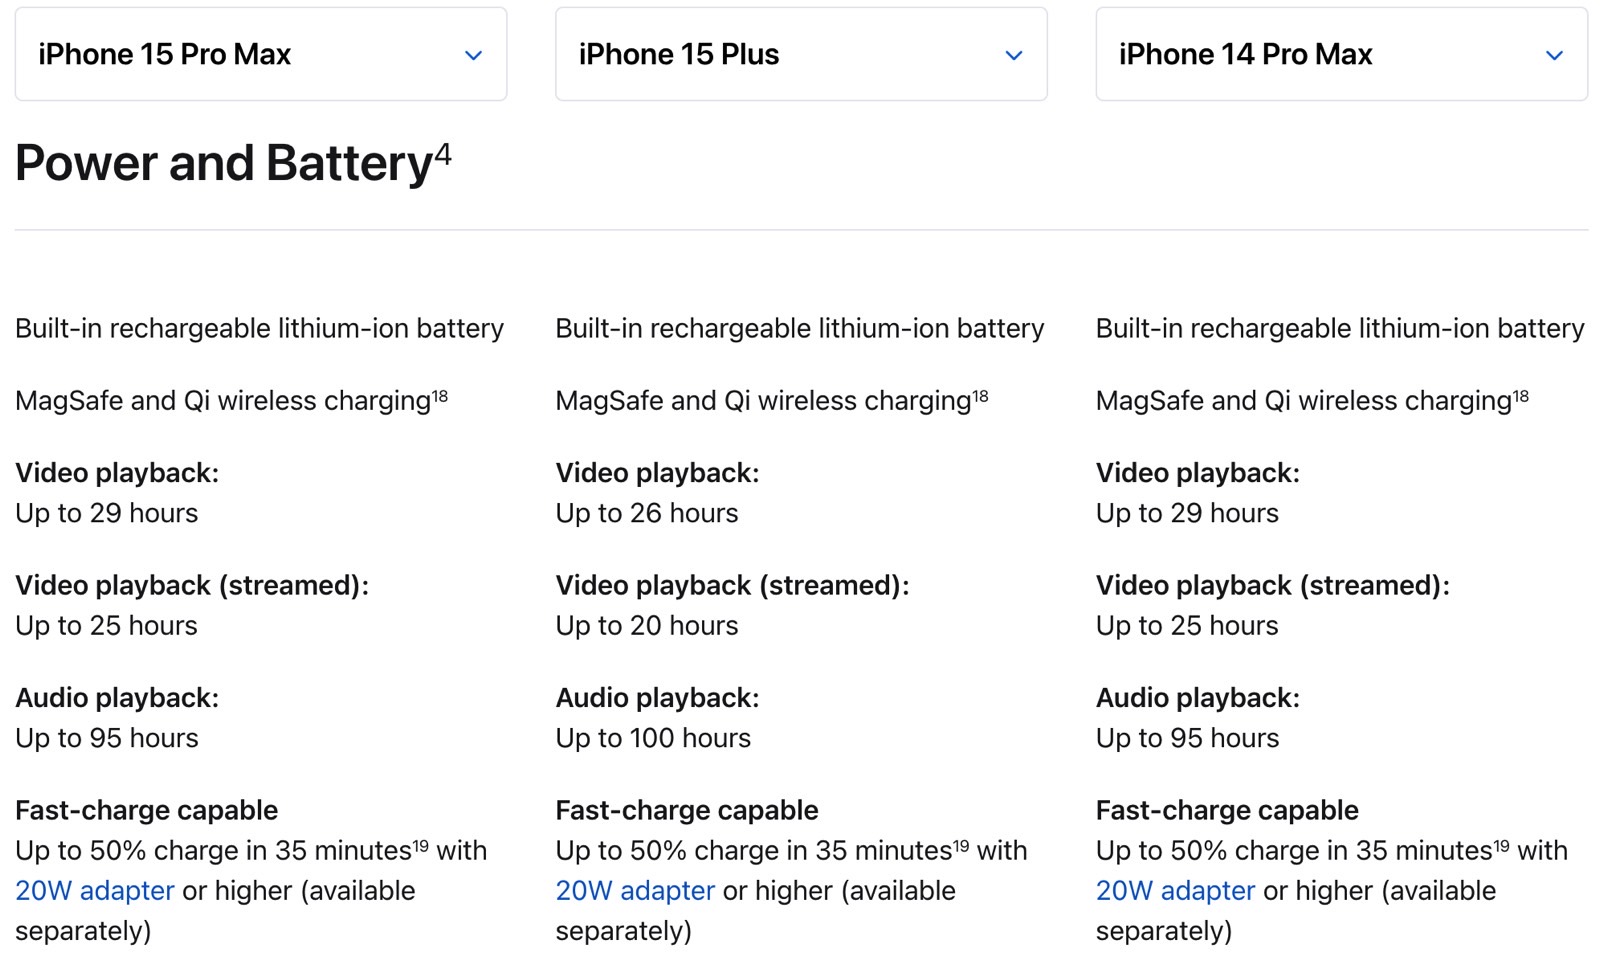 Battery life estimates for iPhone 15 Pro Max, 15 Plus, and 14 Pro Max.